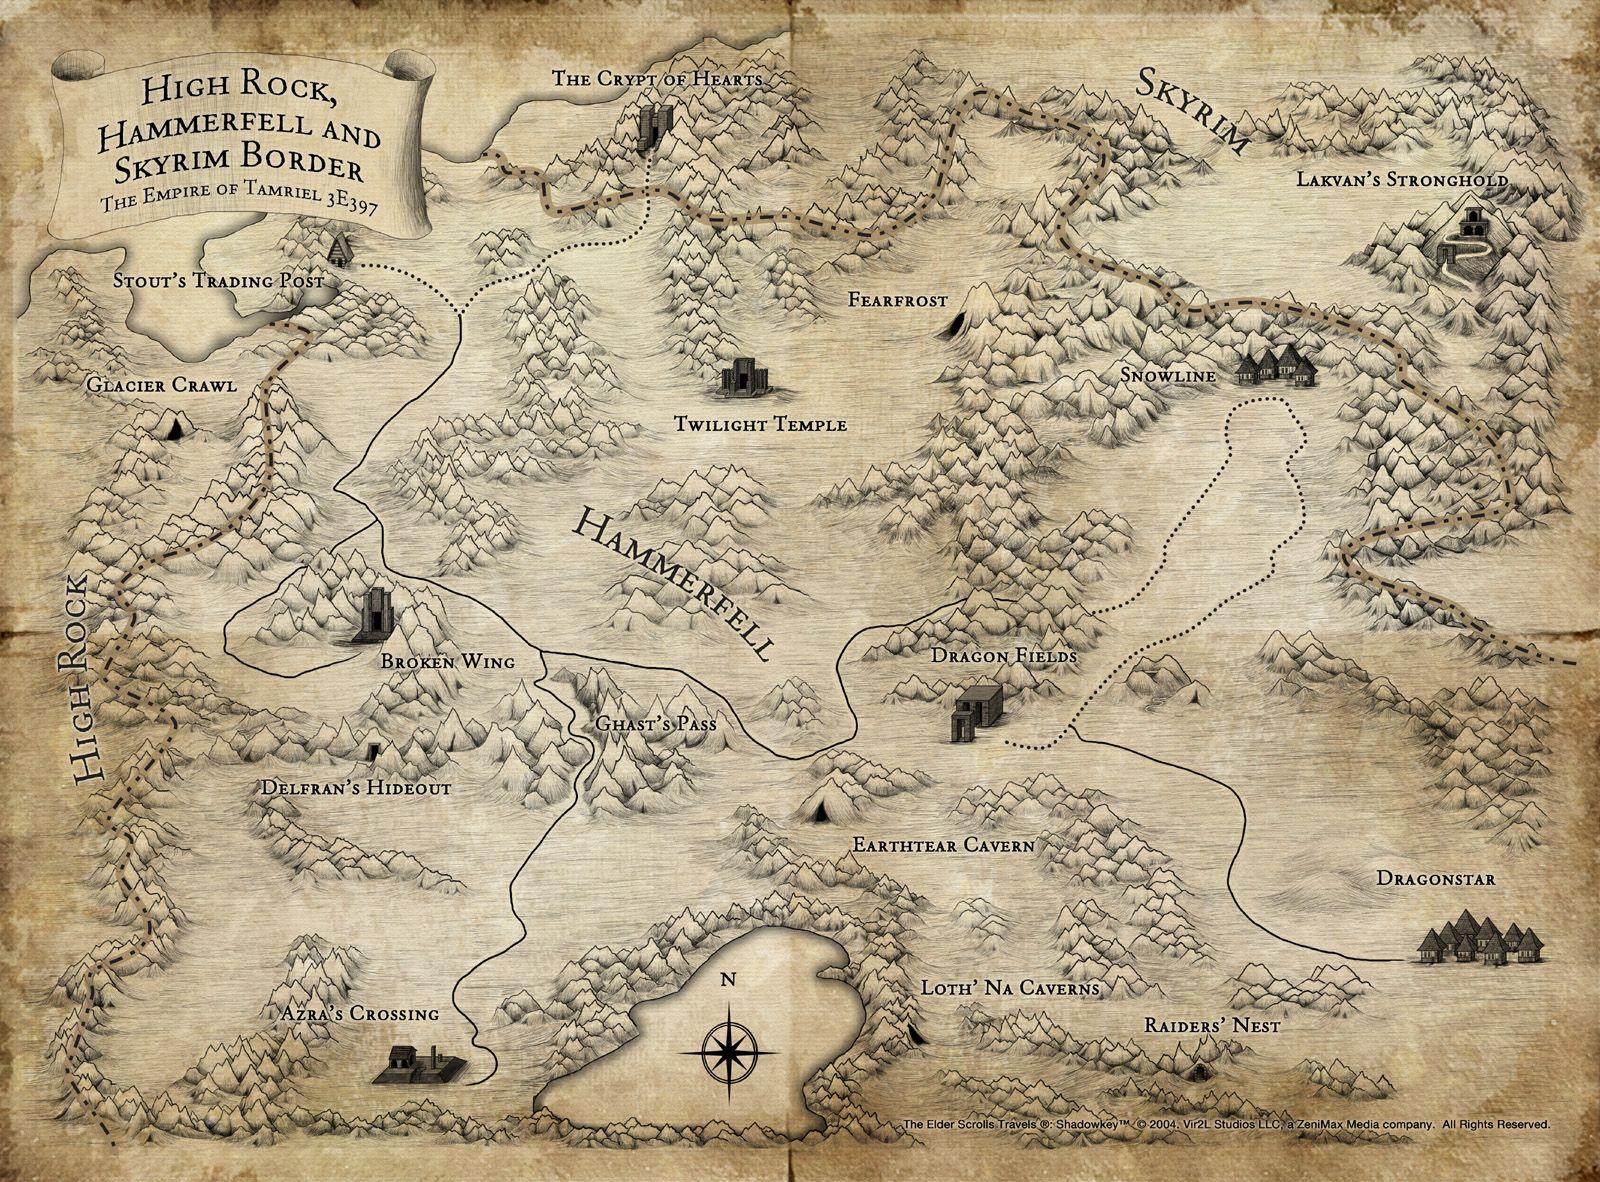 Skyrim Map 25 Different Maps of Skyrim to Map Out Your Journey